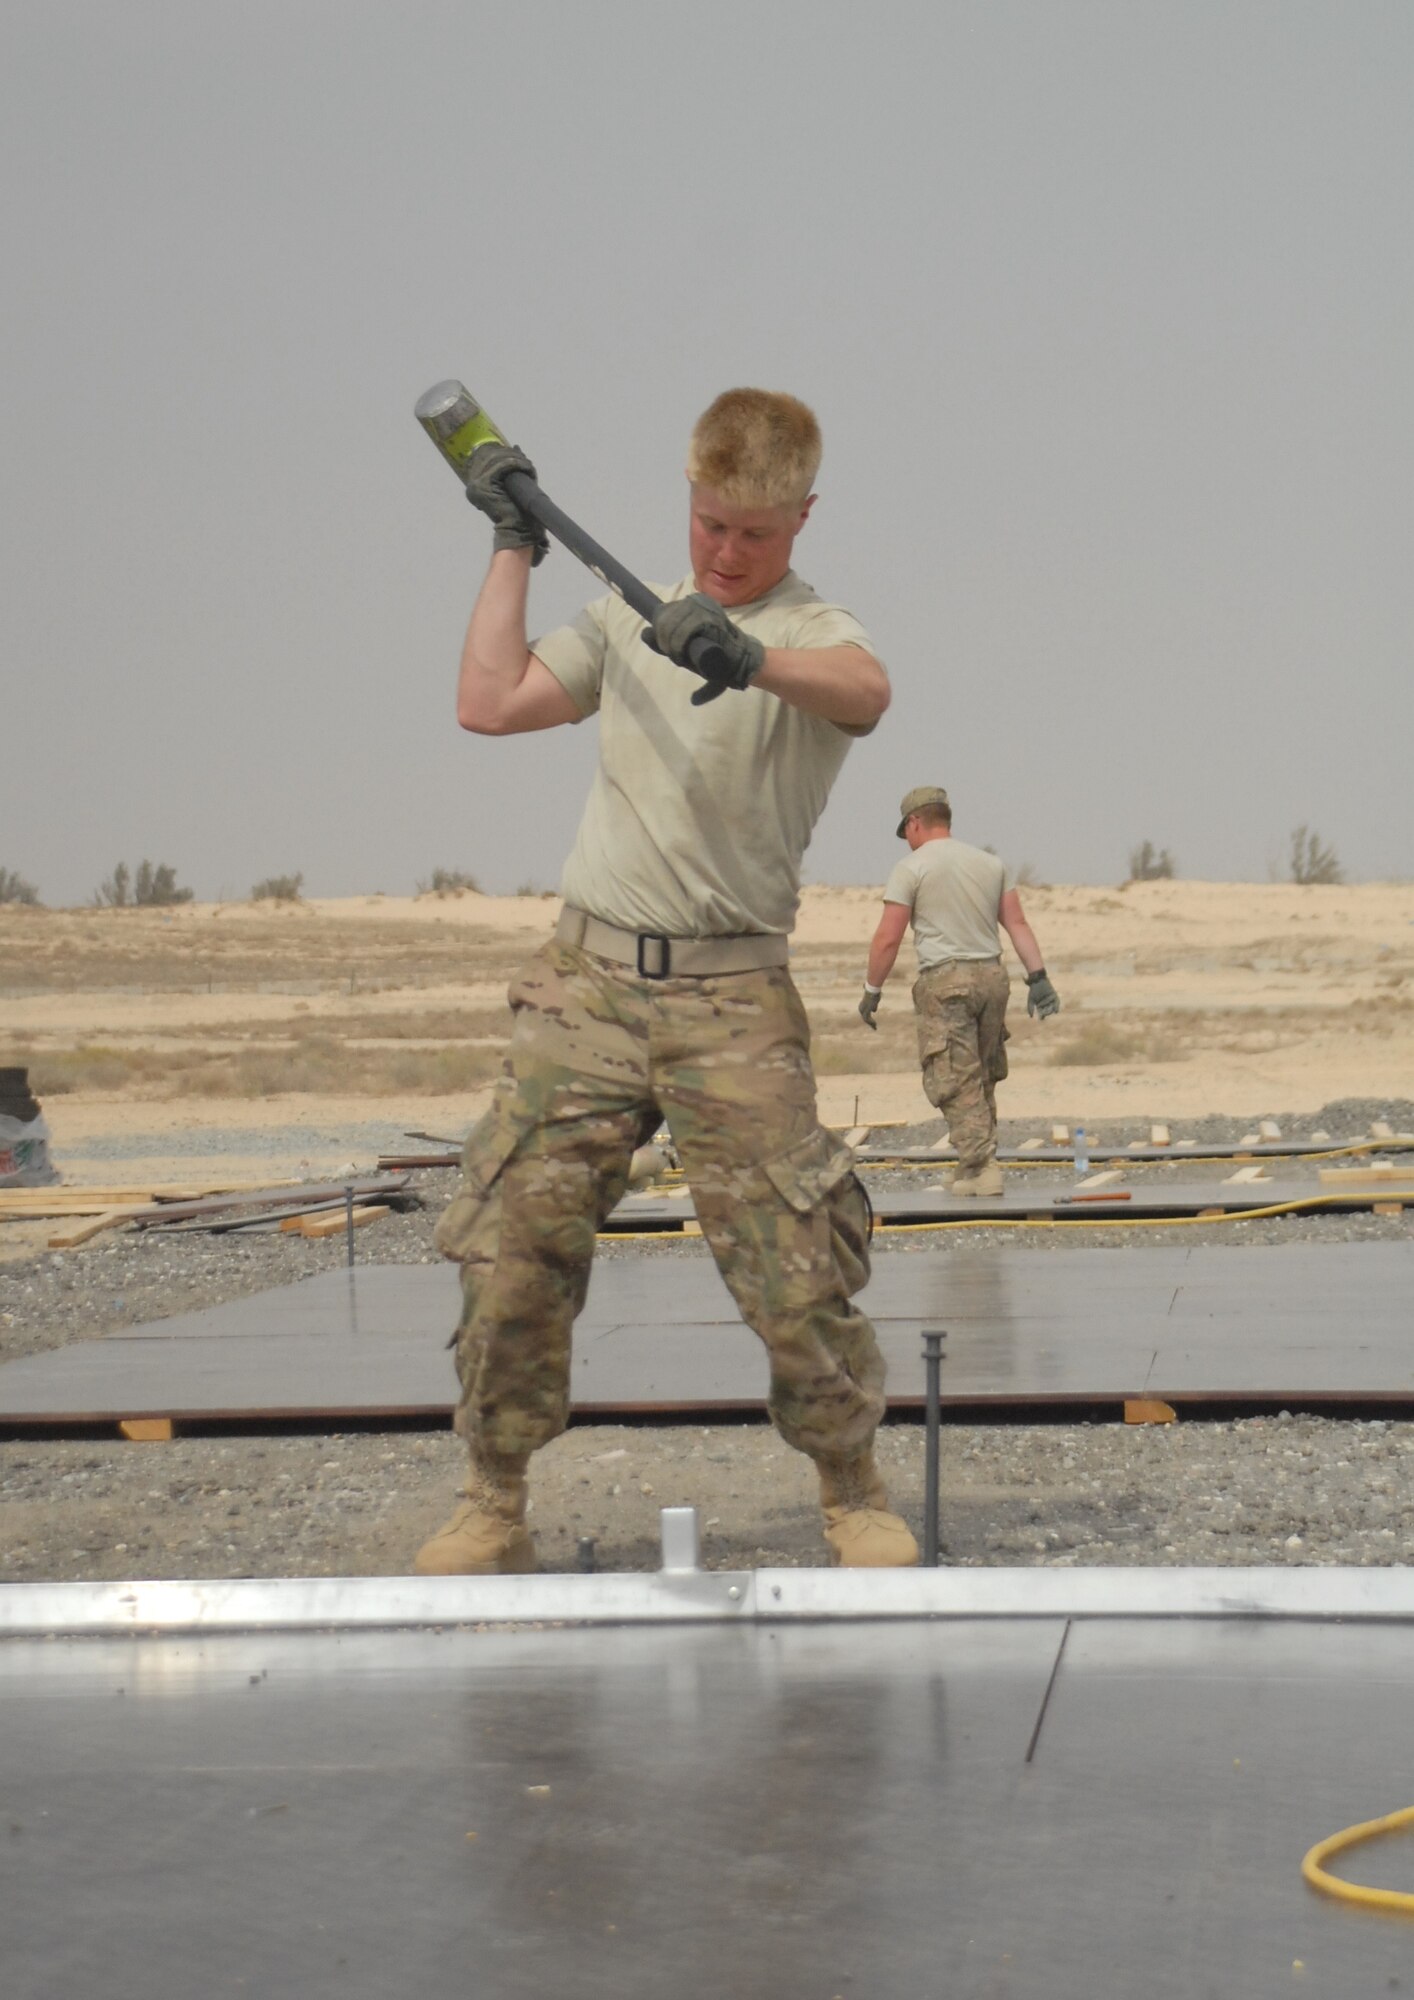 Spc. Kaleb Hazlett, 1313th Engineer Company heavy equipment operator, swings a sledge hammer while building a tent at the 332nd Air Expeditionary Group March 19, 2015.  Members of the Indiana National Guard came together to build 60 tents for personnel deployed in support of Operation Inherent Resolve. (U.S. Air Force photo by 1st Lt. Sarah Ruckriegle)